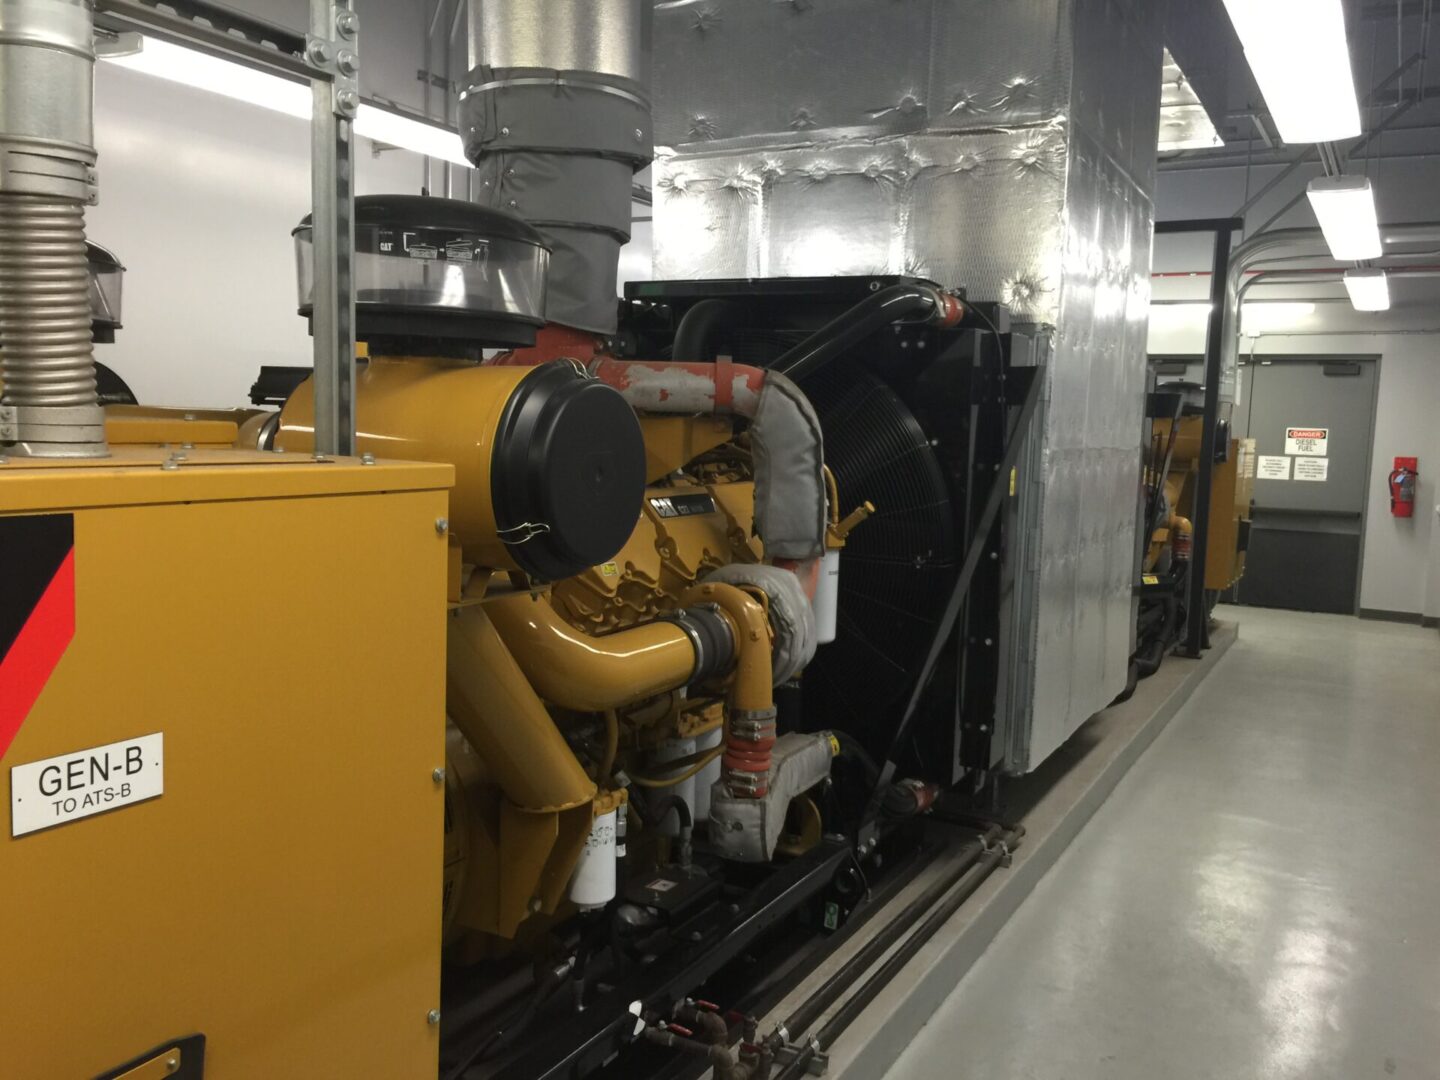 Yellow heavy equipment with cylindrical tubes attached to a wall-sized ventilation fan